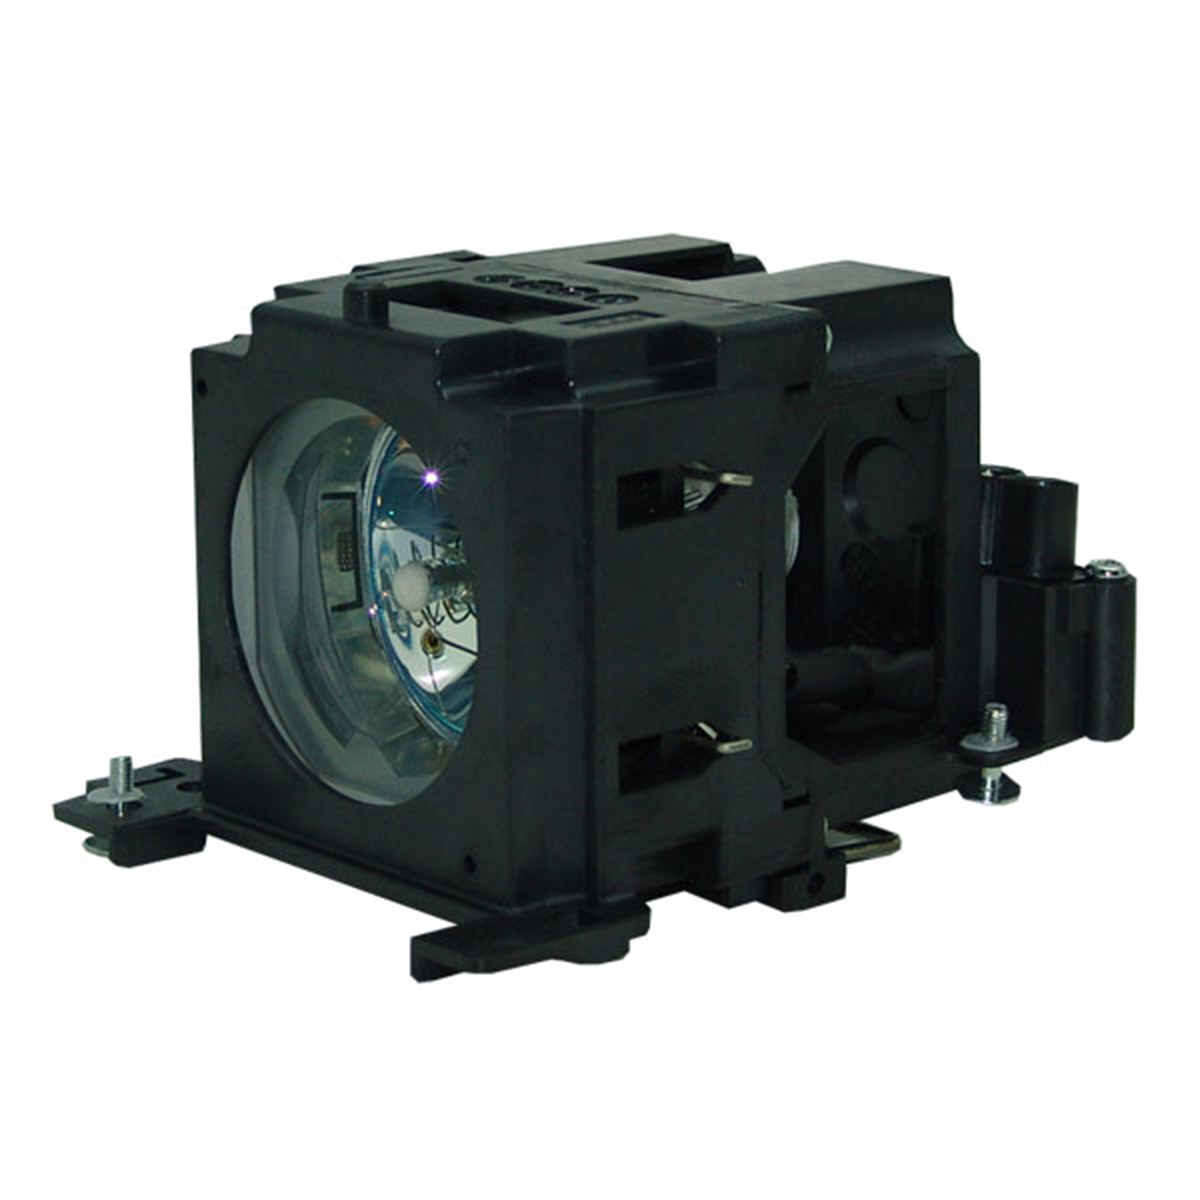 Lamp & Housing for the Dukane Image Pro 8755D-RJ Projector - 90 Day Warranty - image 2 of 4